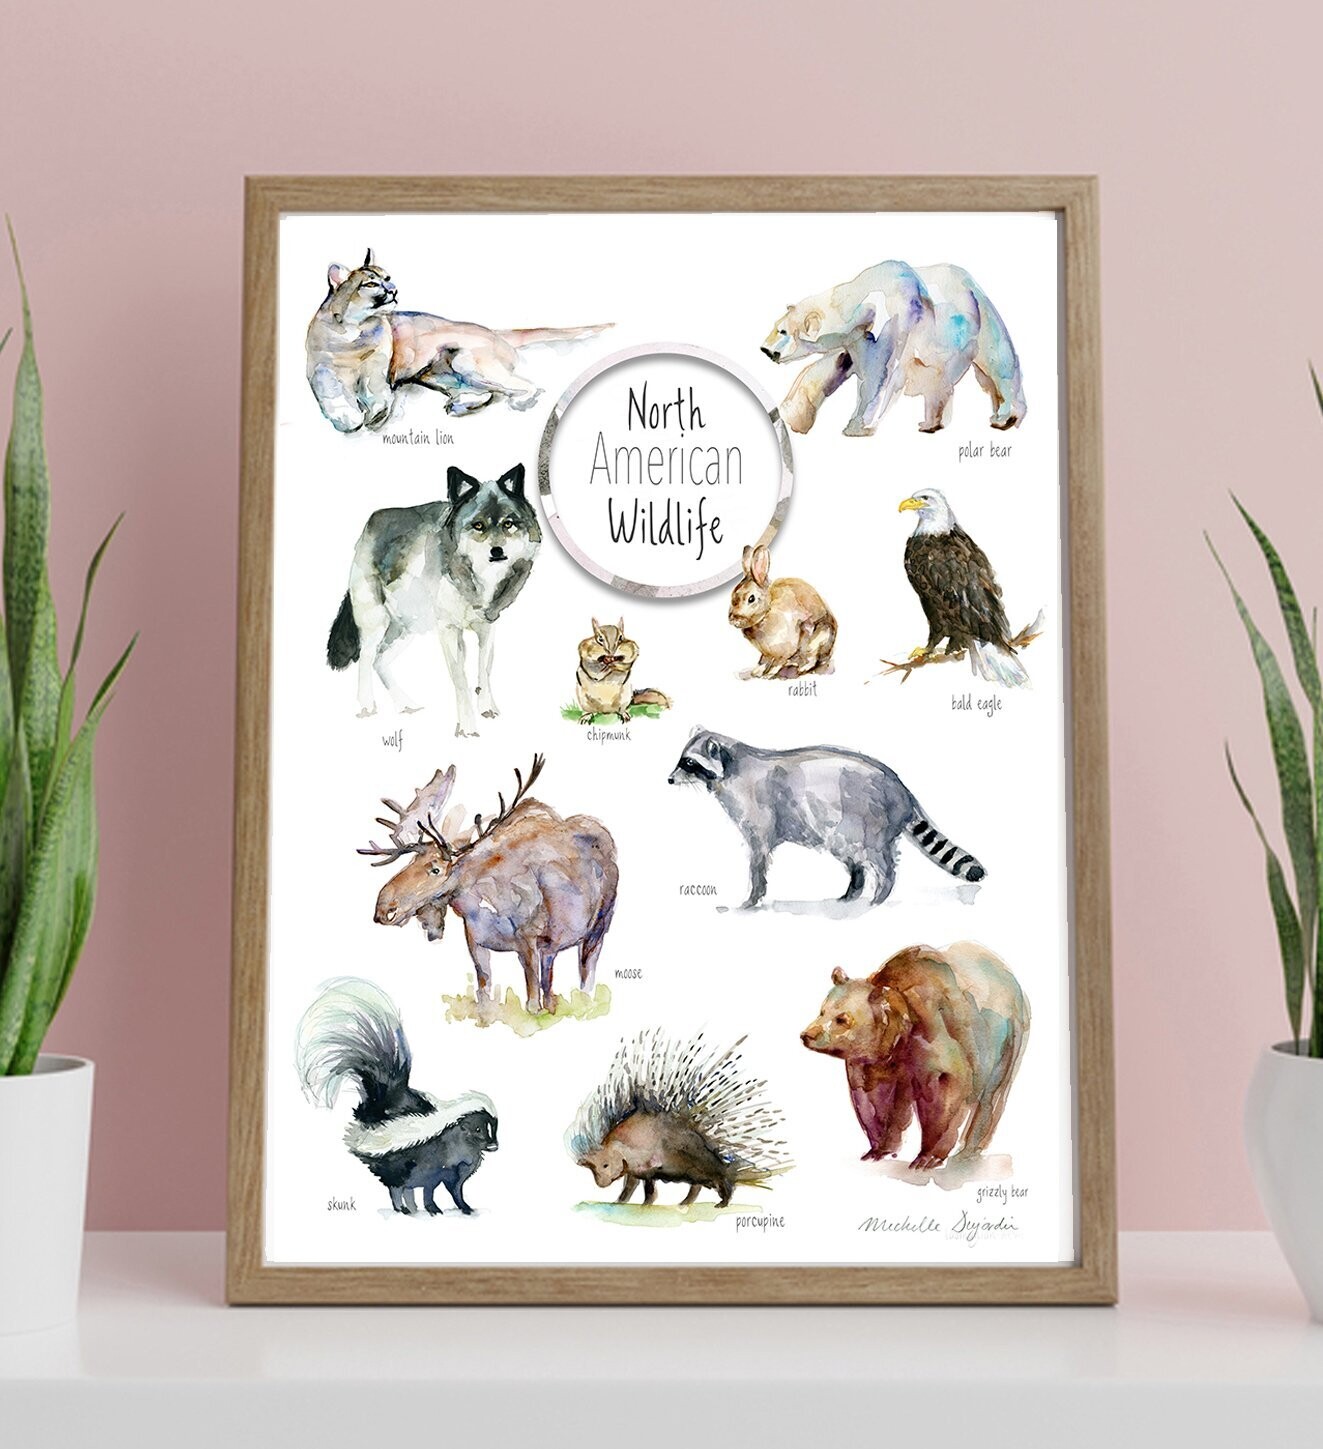 North American wildlife poster with watercolor illustrations